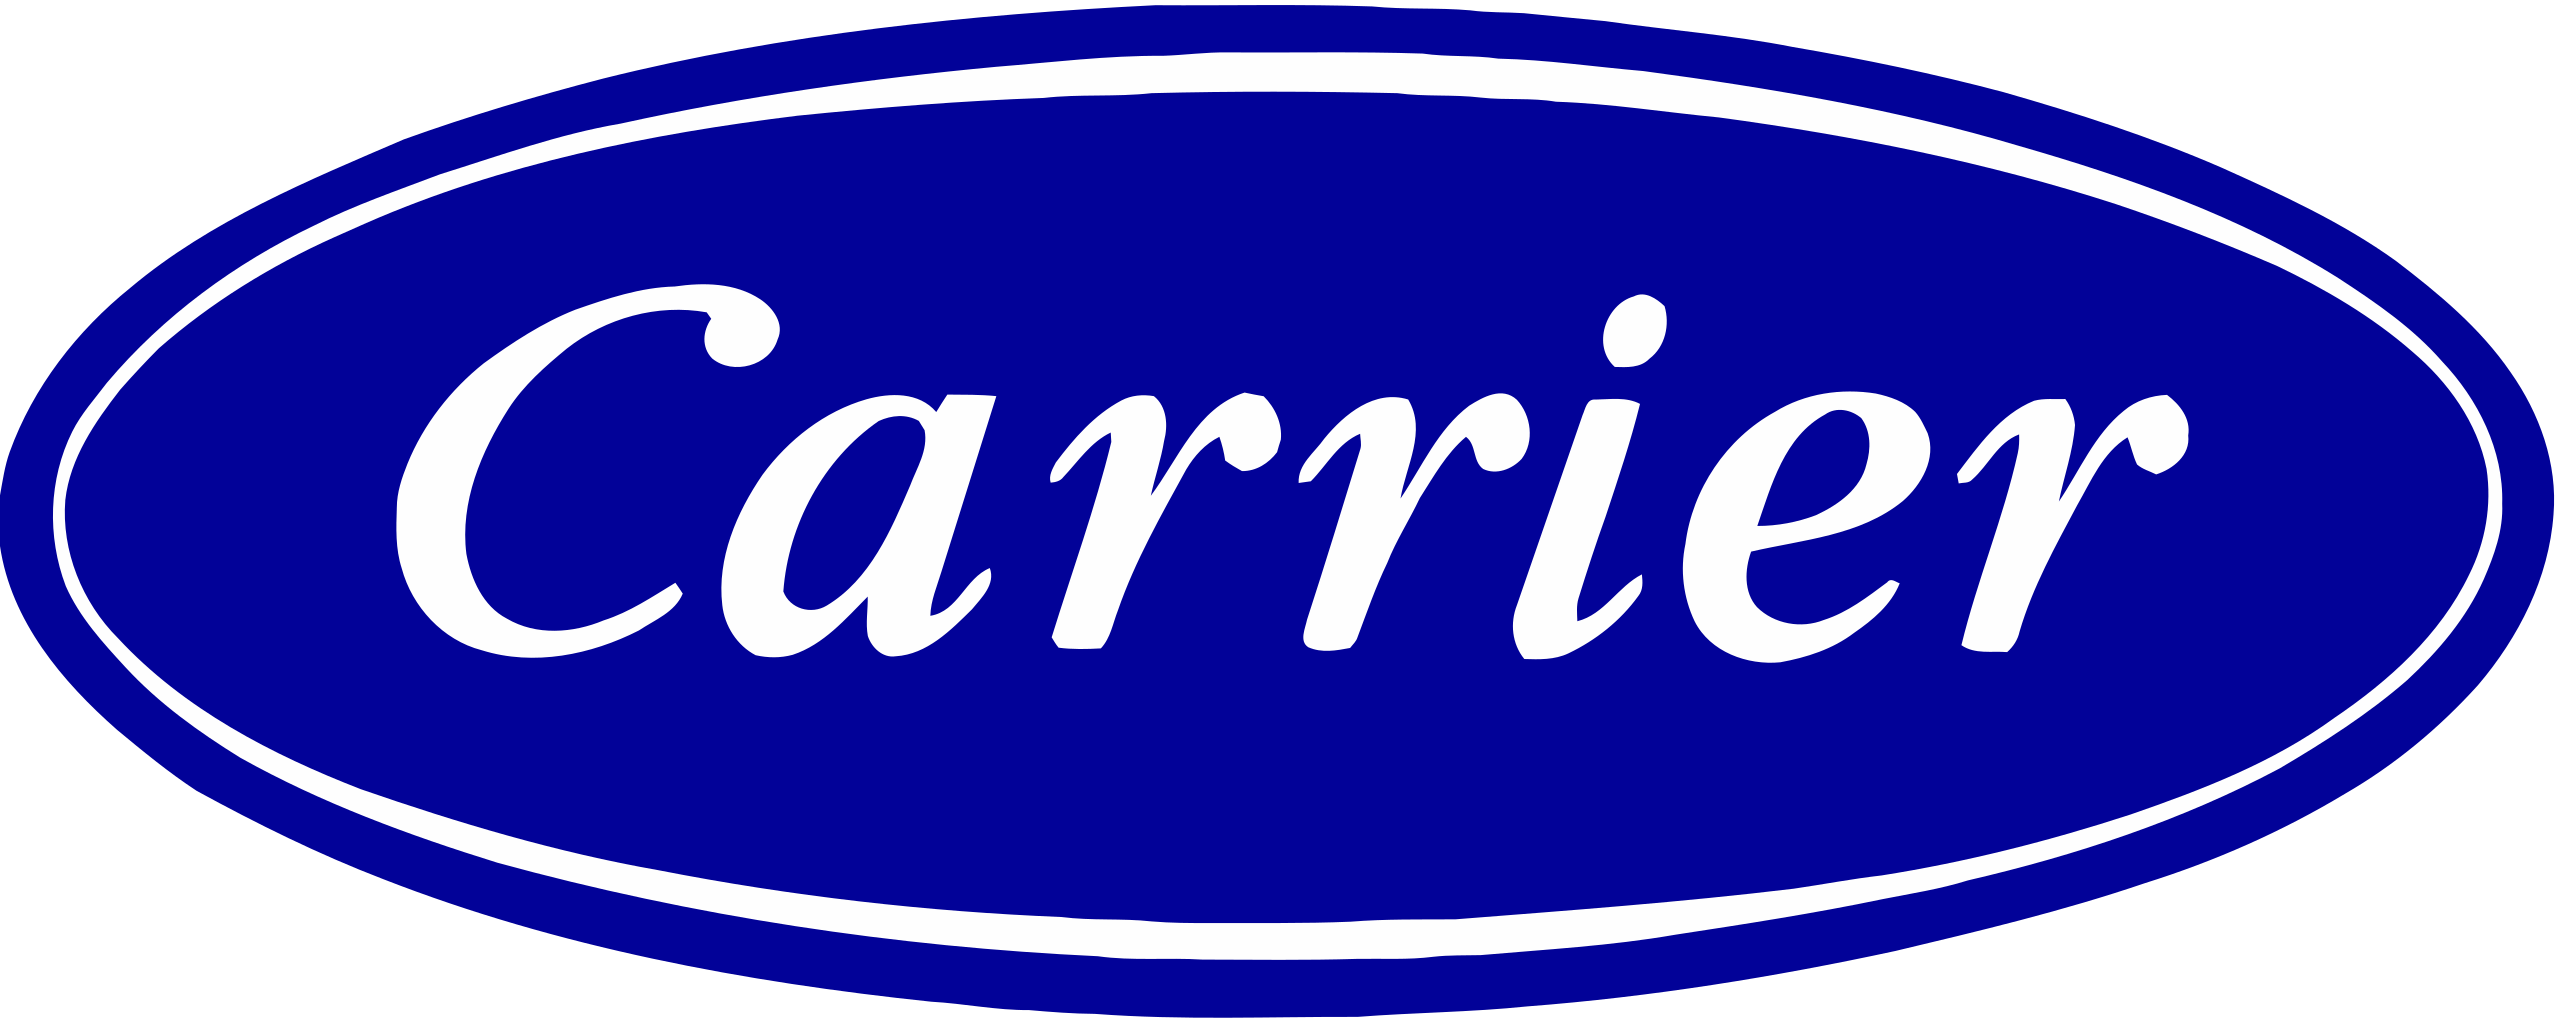 Carrier logo in white cursive against blue background with white trim.